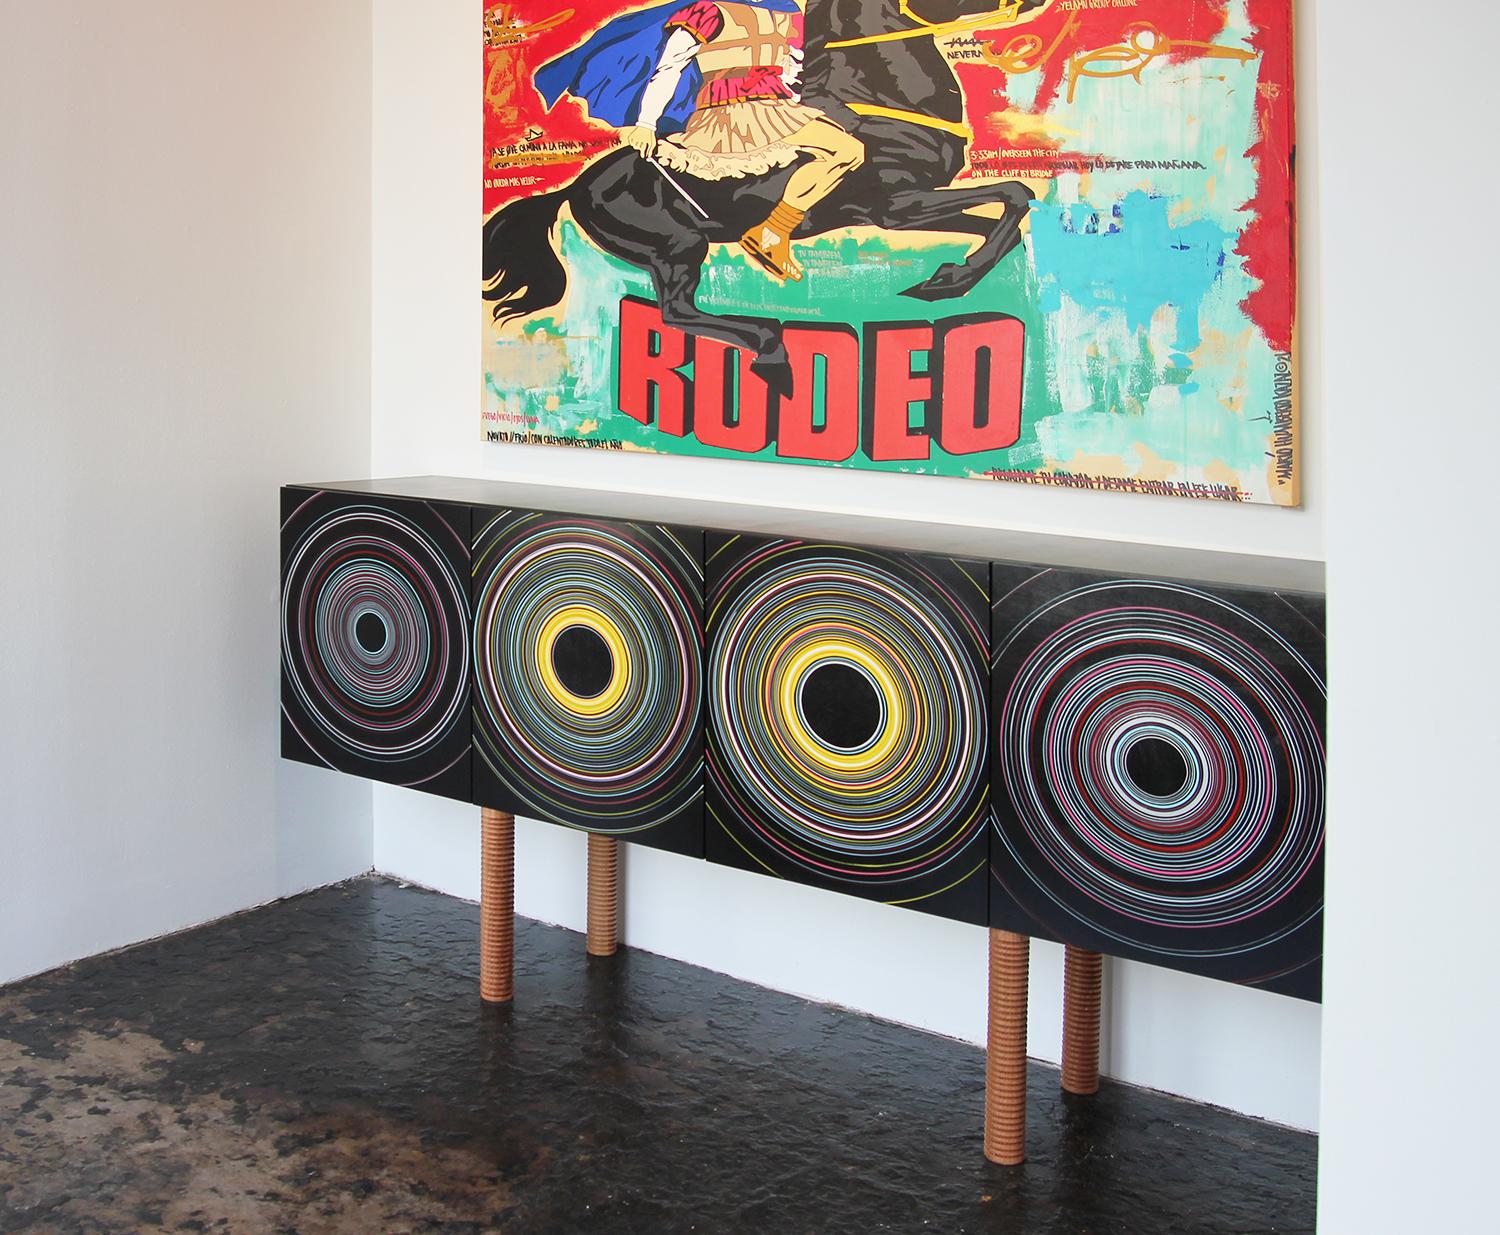 Stunning custom contemporary modern sideboard with colorful abstract figurative painting. This handmade sideboard was custom made in Houston, Texas in collaboration with artist David Hardaker. The hand painted door fronts feature four colorful